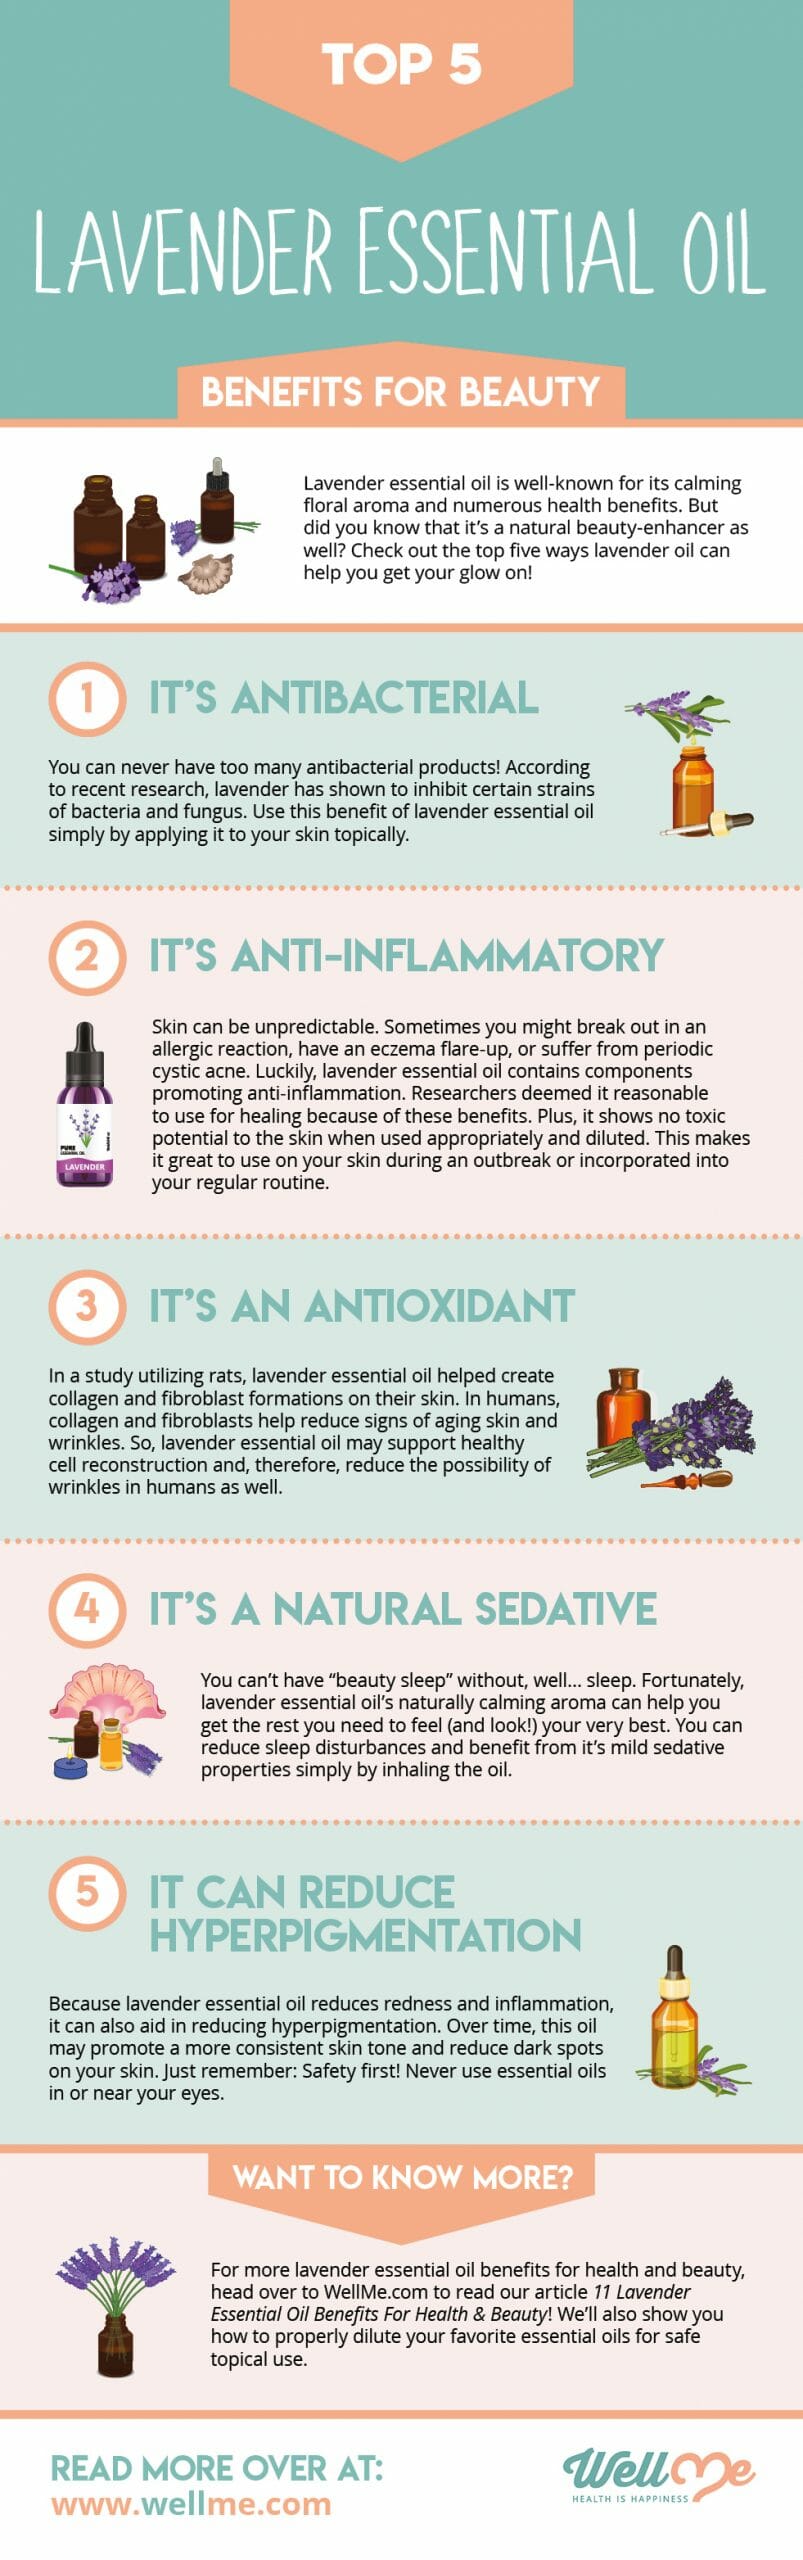 Top 5 Lavender Essential Oil Benefits for Beauty infographic